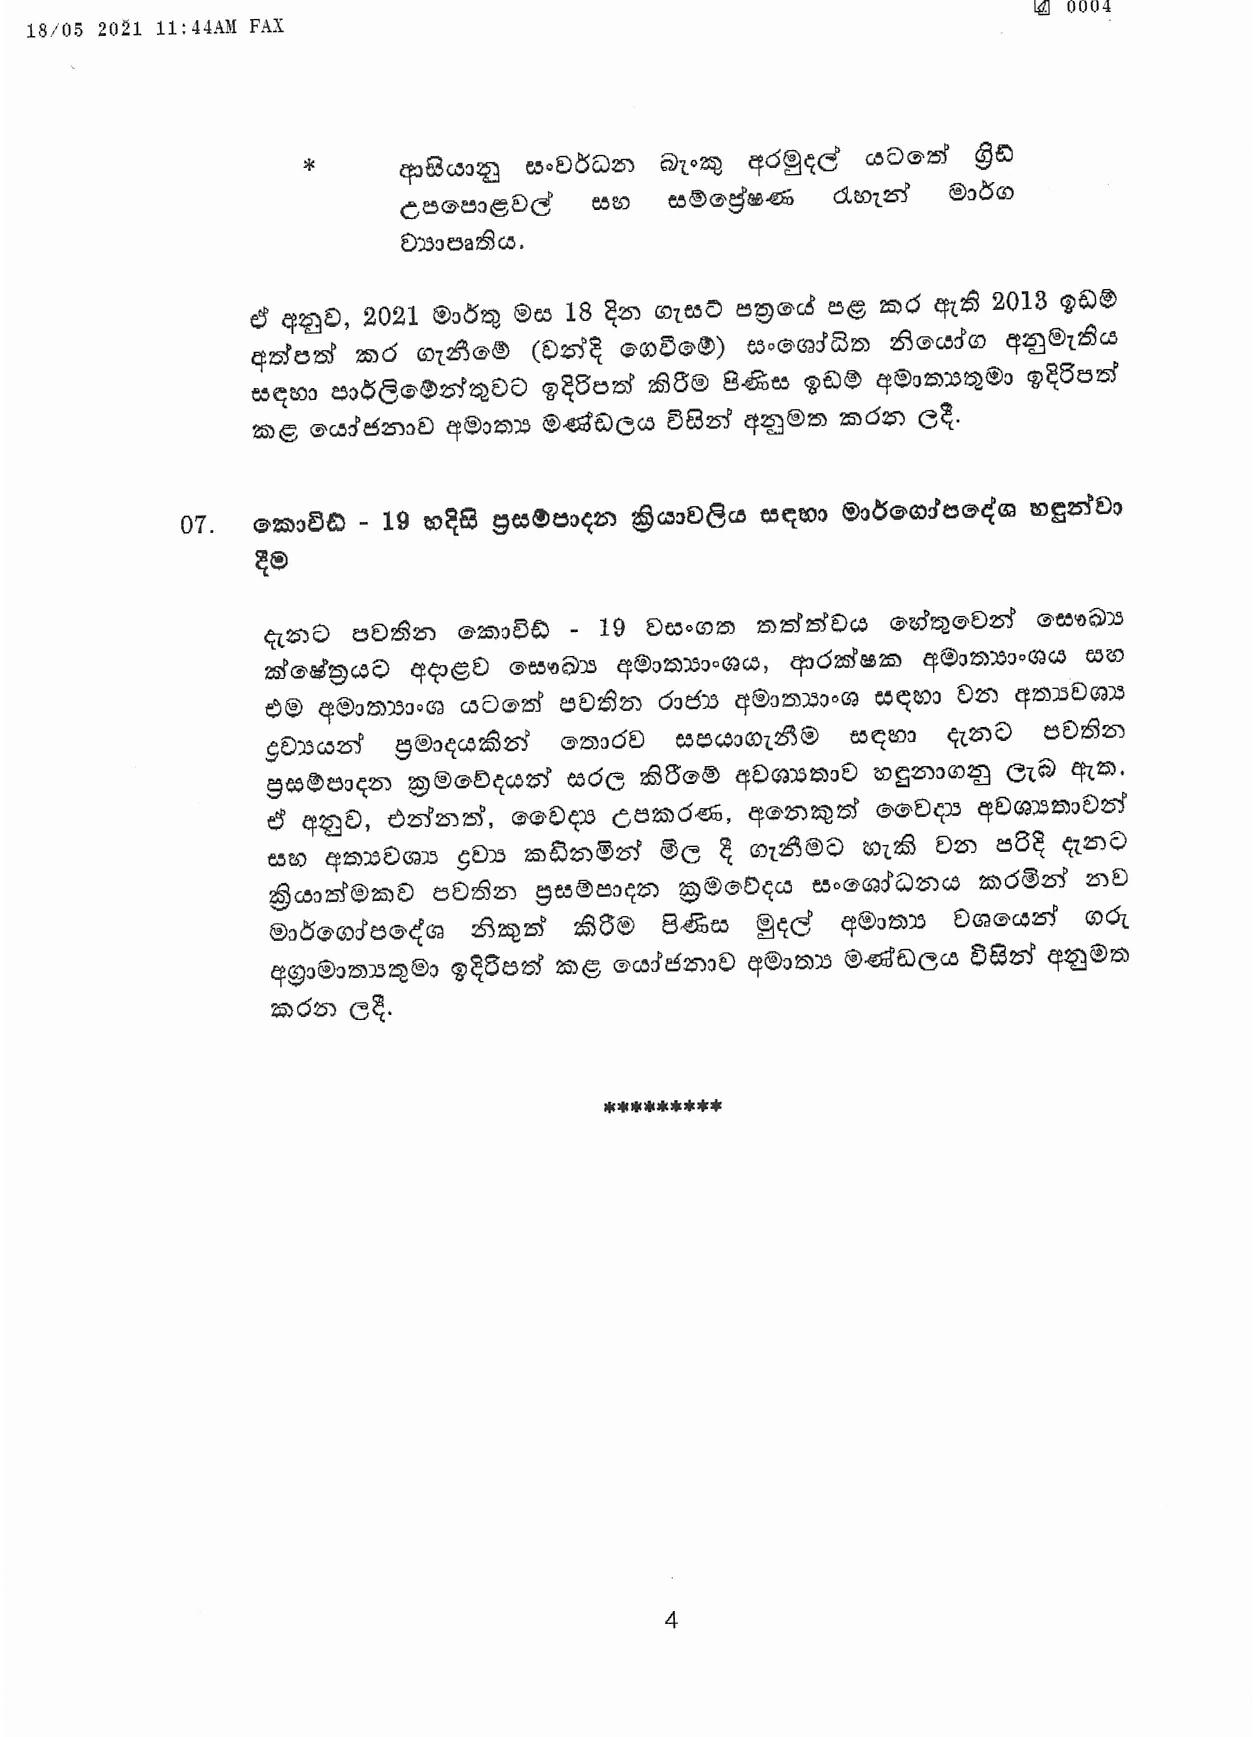 Cabinet Decision on 17.05.2021 page 004